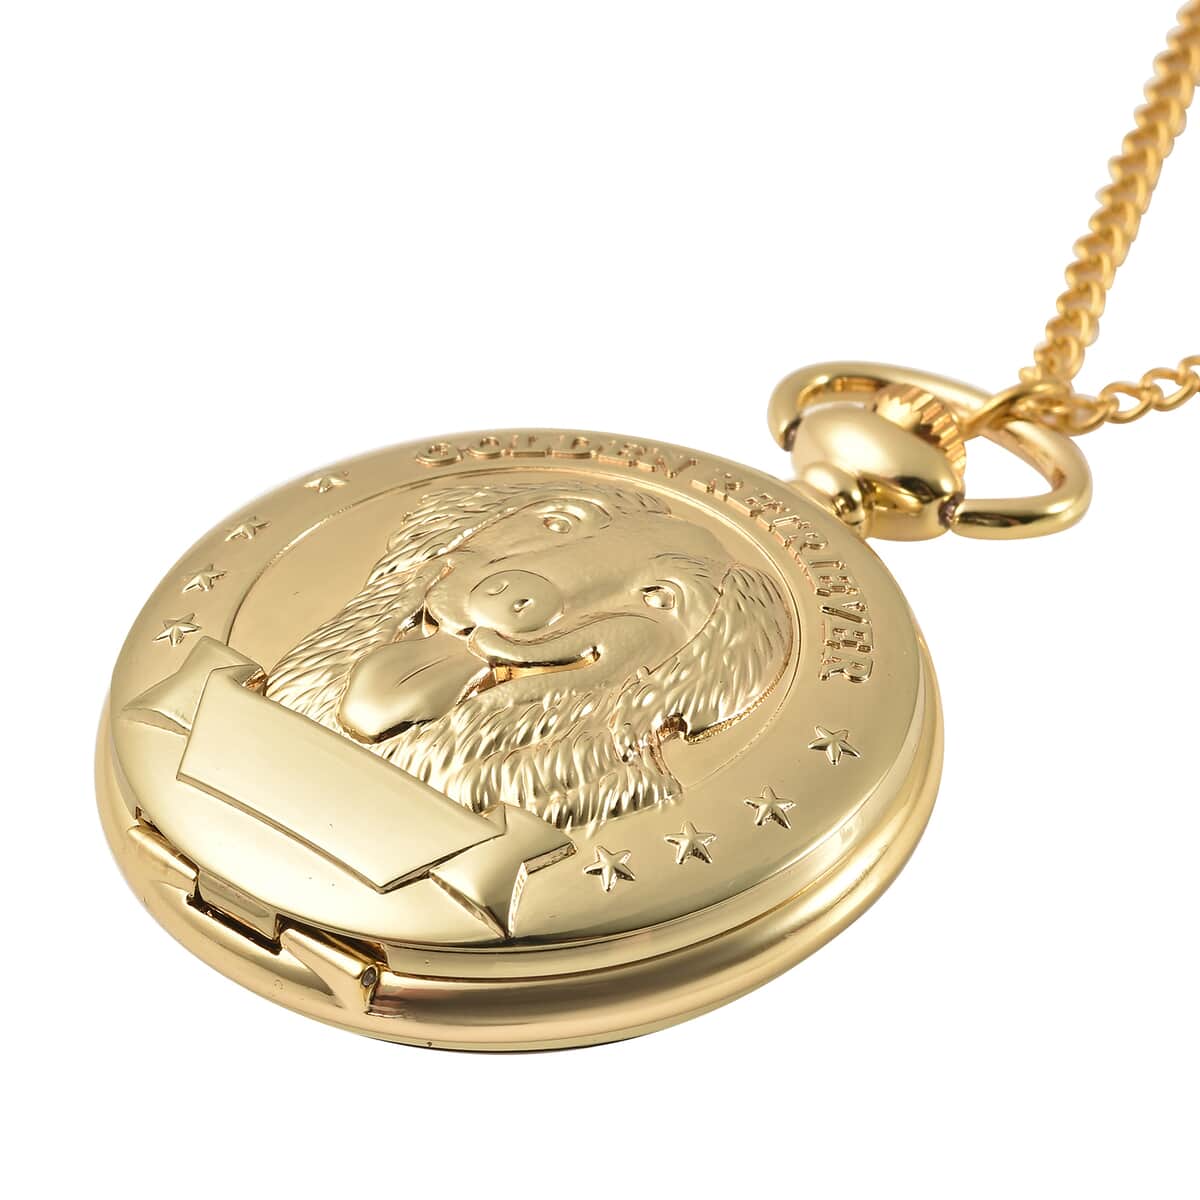 Strada Japanese Movement Golden Retriever Pocket Watch in Goldtone with Chain (31 Inches) image number 2